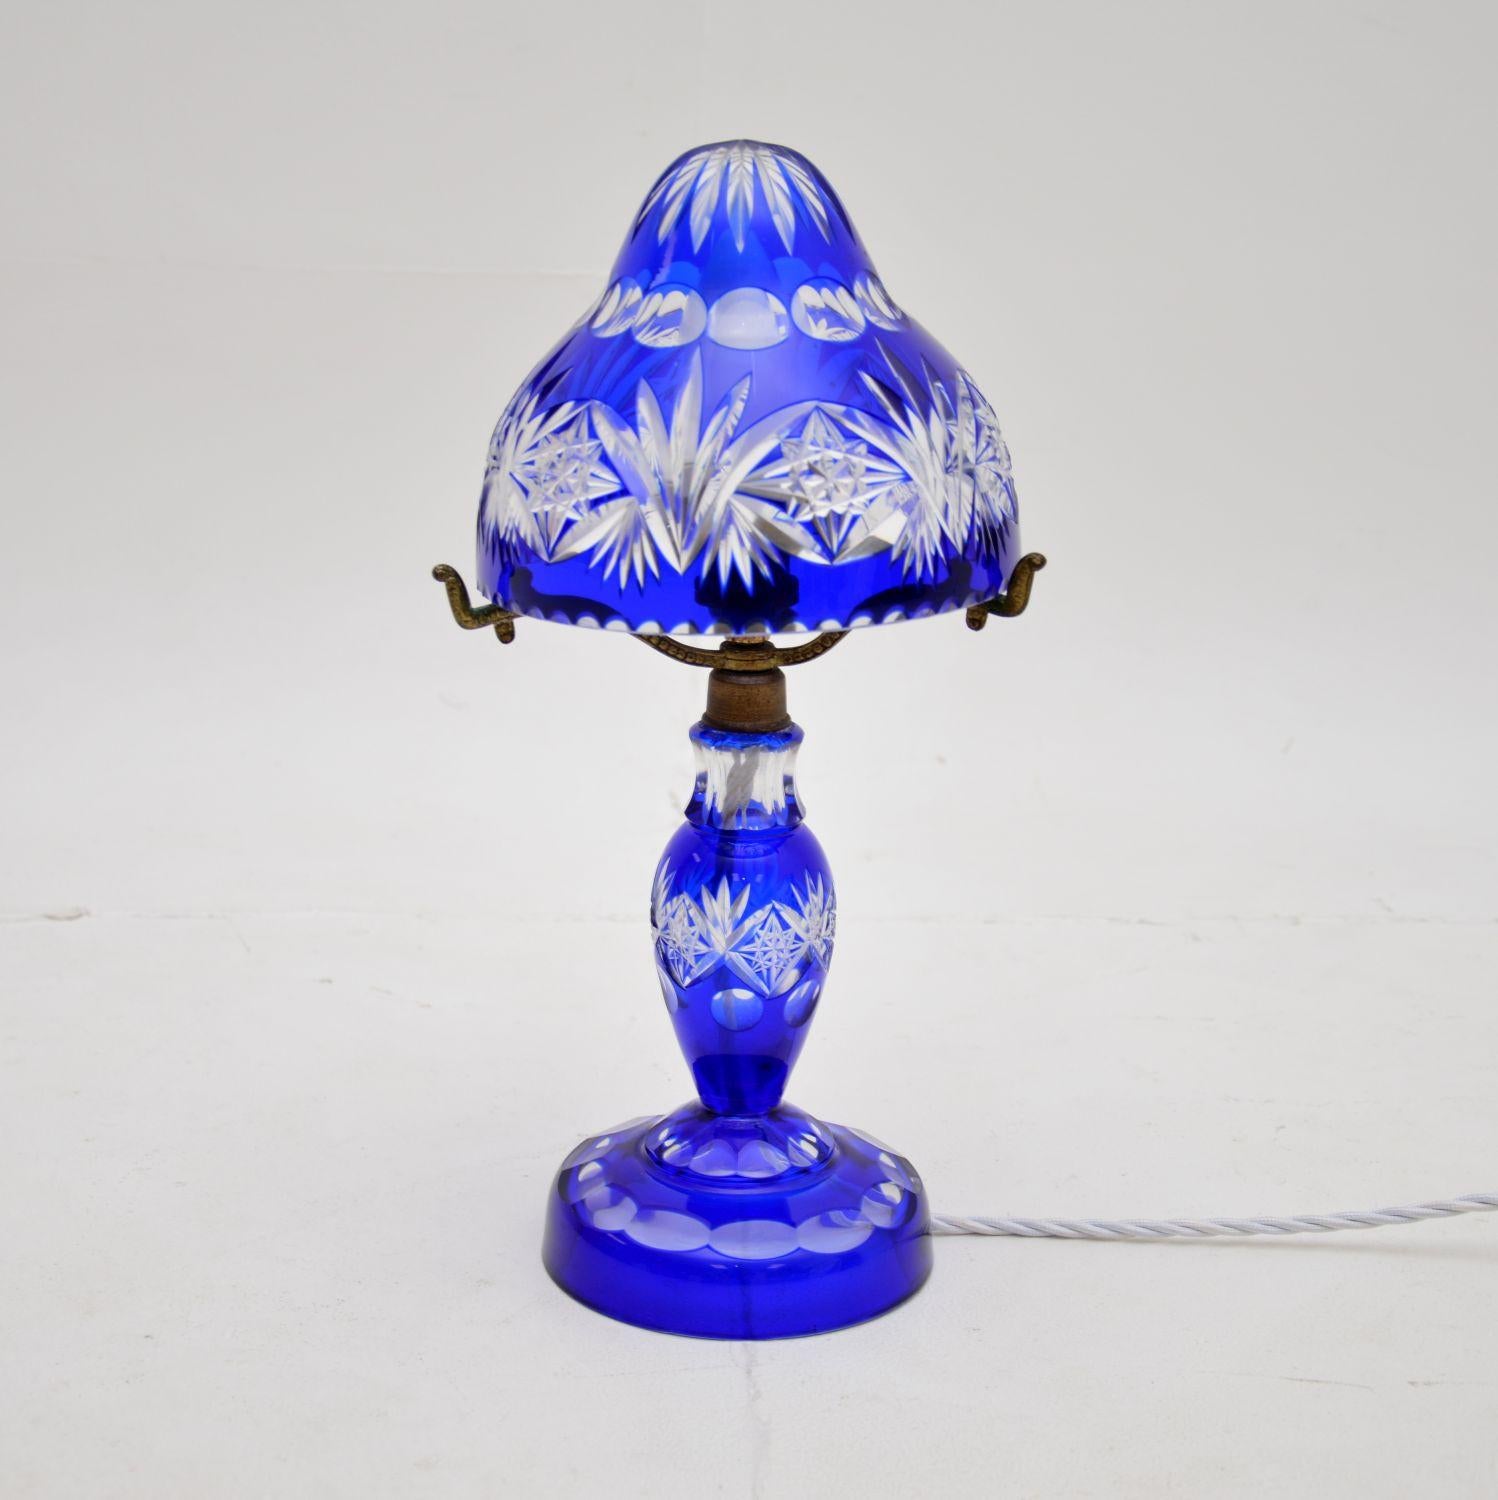 A beautiful antique Bohemian crystal glass table lamp, vase and dish. They were made in Czech Bohemia, they date from around the 1910-20’s.

The quality is fantastic, the clue crystal glass has absolutely gorgeous hand cut decorations. The lamp has